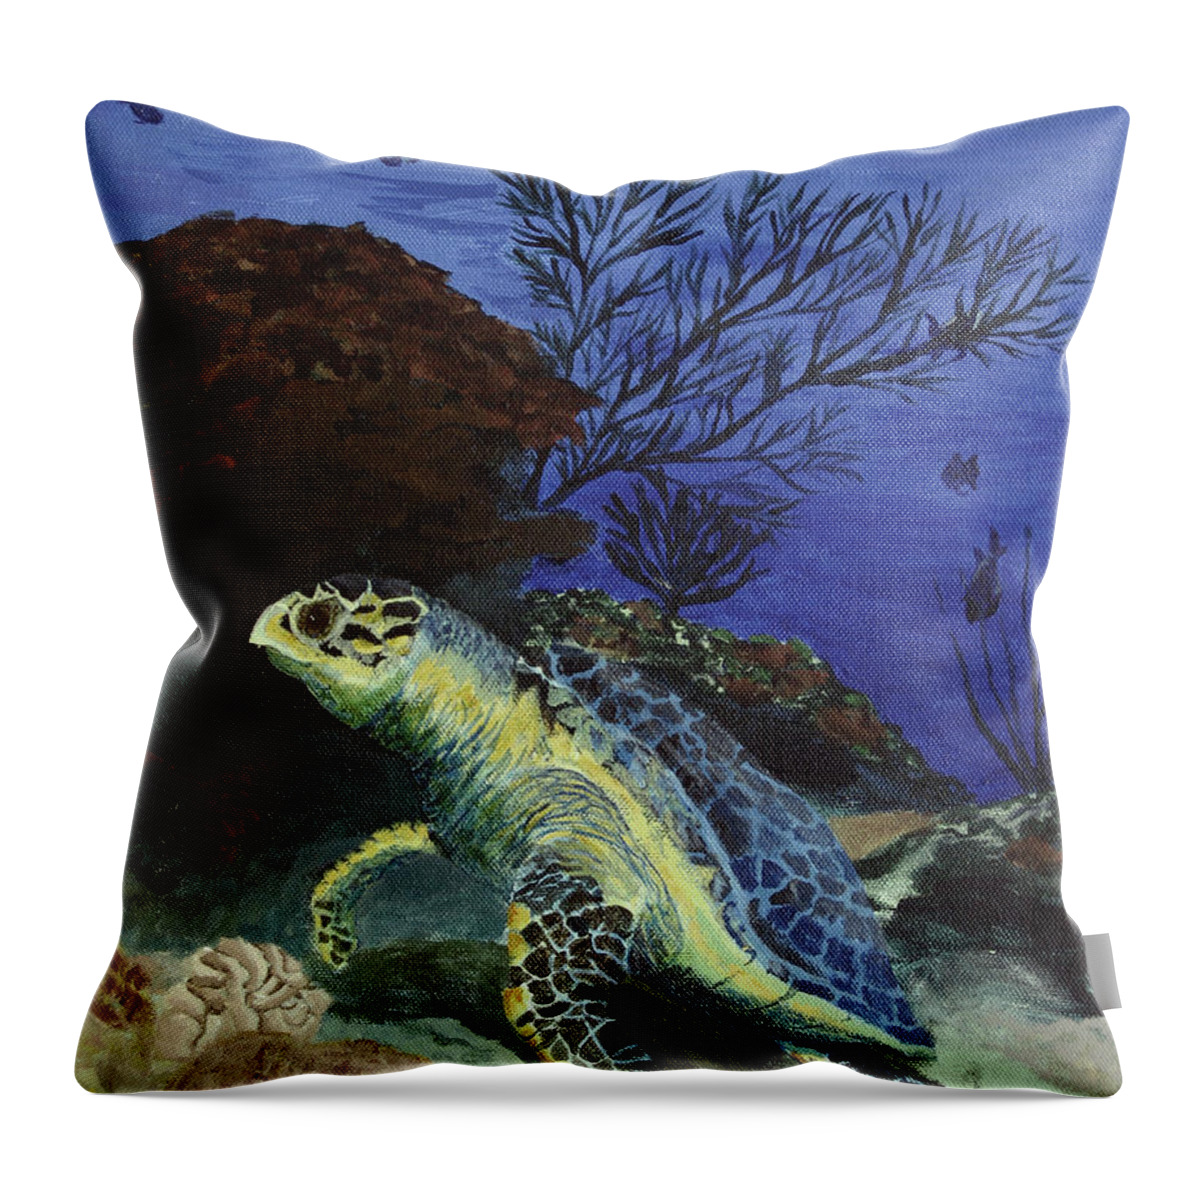 Hawkbill Throw Pillow featuring the painting The Newcomer by Megan Collins